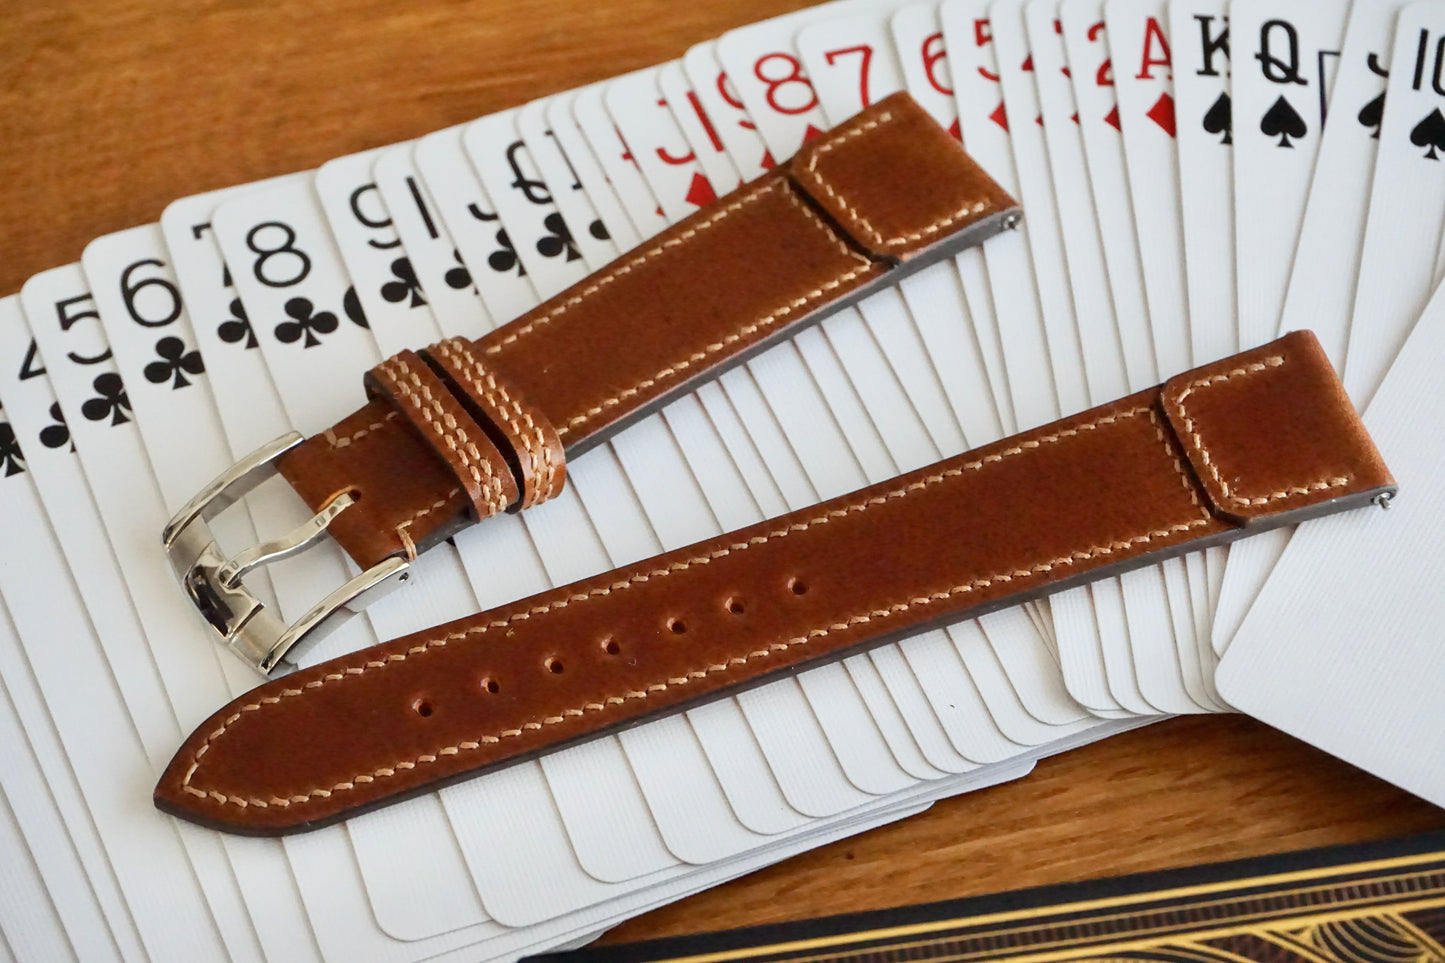 Reverso style Brown Shell cordovan watch strap.